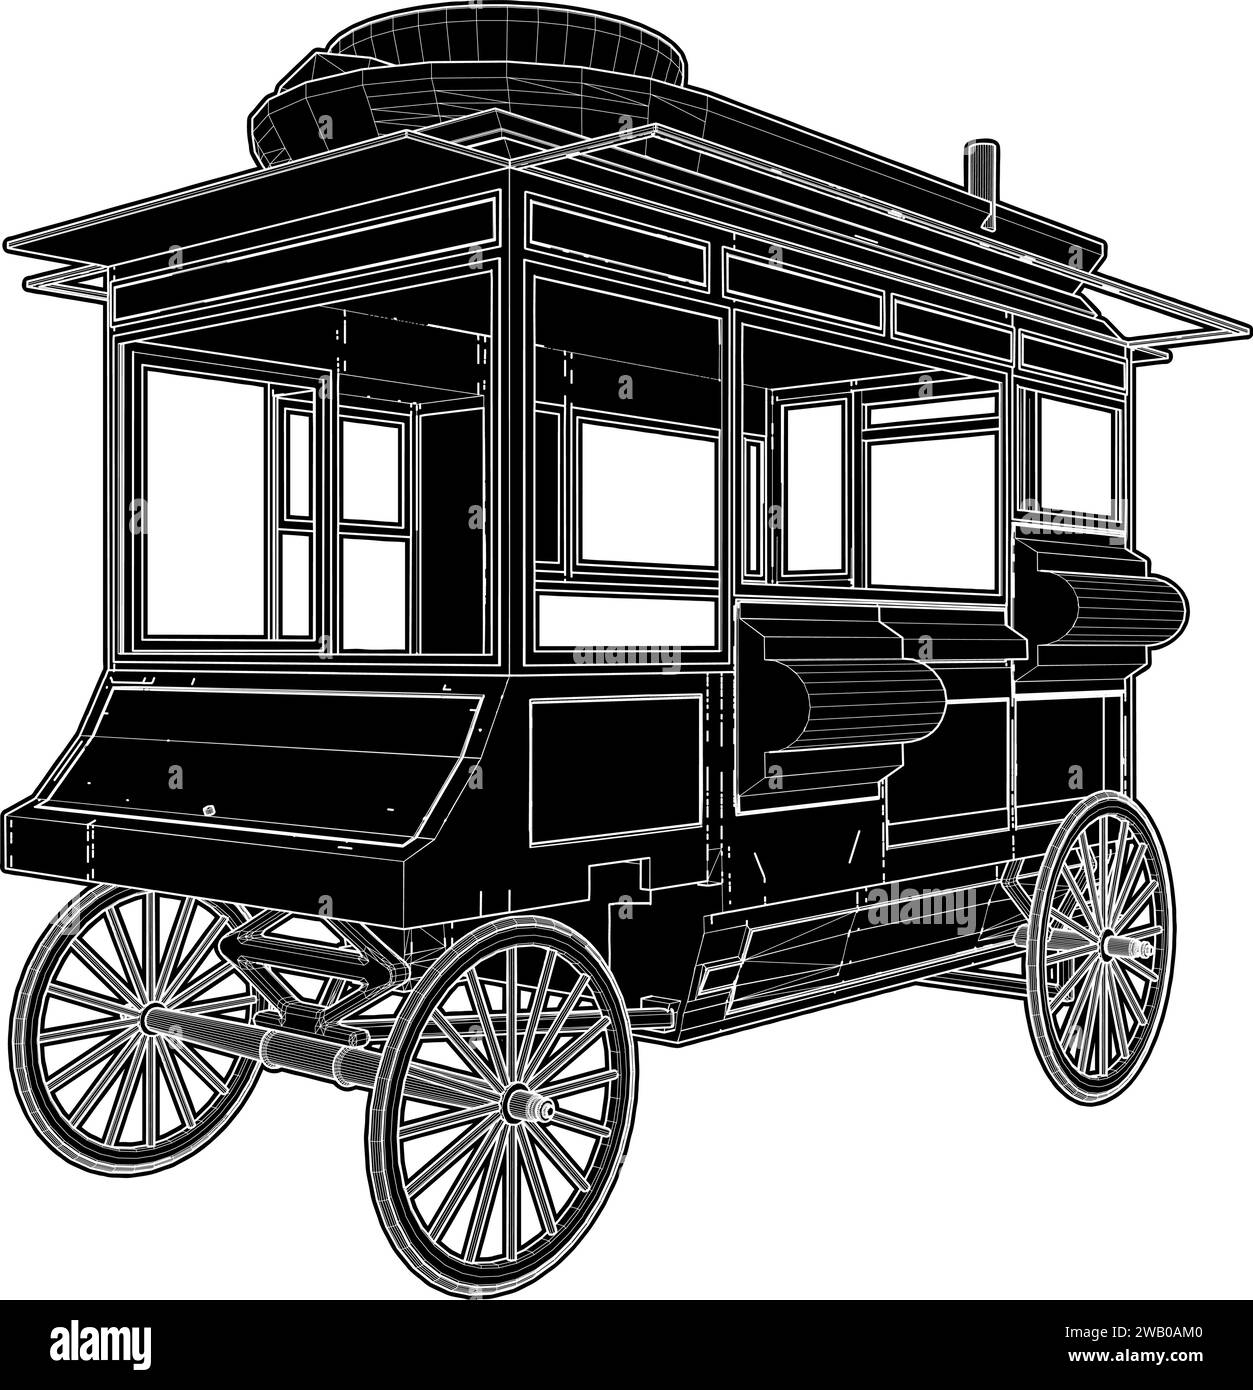 Antique Popcorn Wagon Vector. Illustration Isolated On White Background. A Vector Illustration Of The Food Trucks. Stock Vector